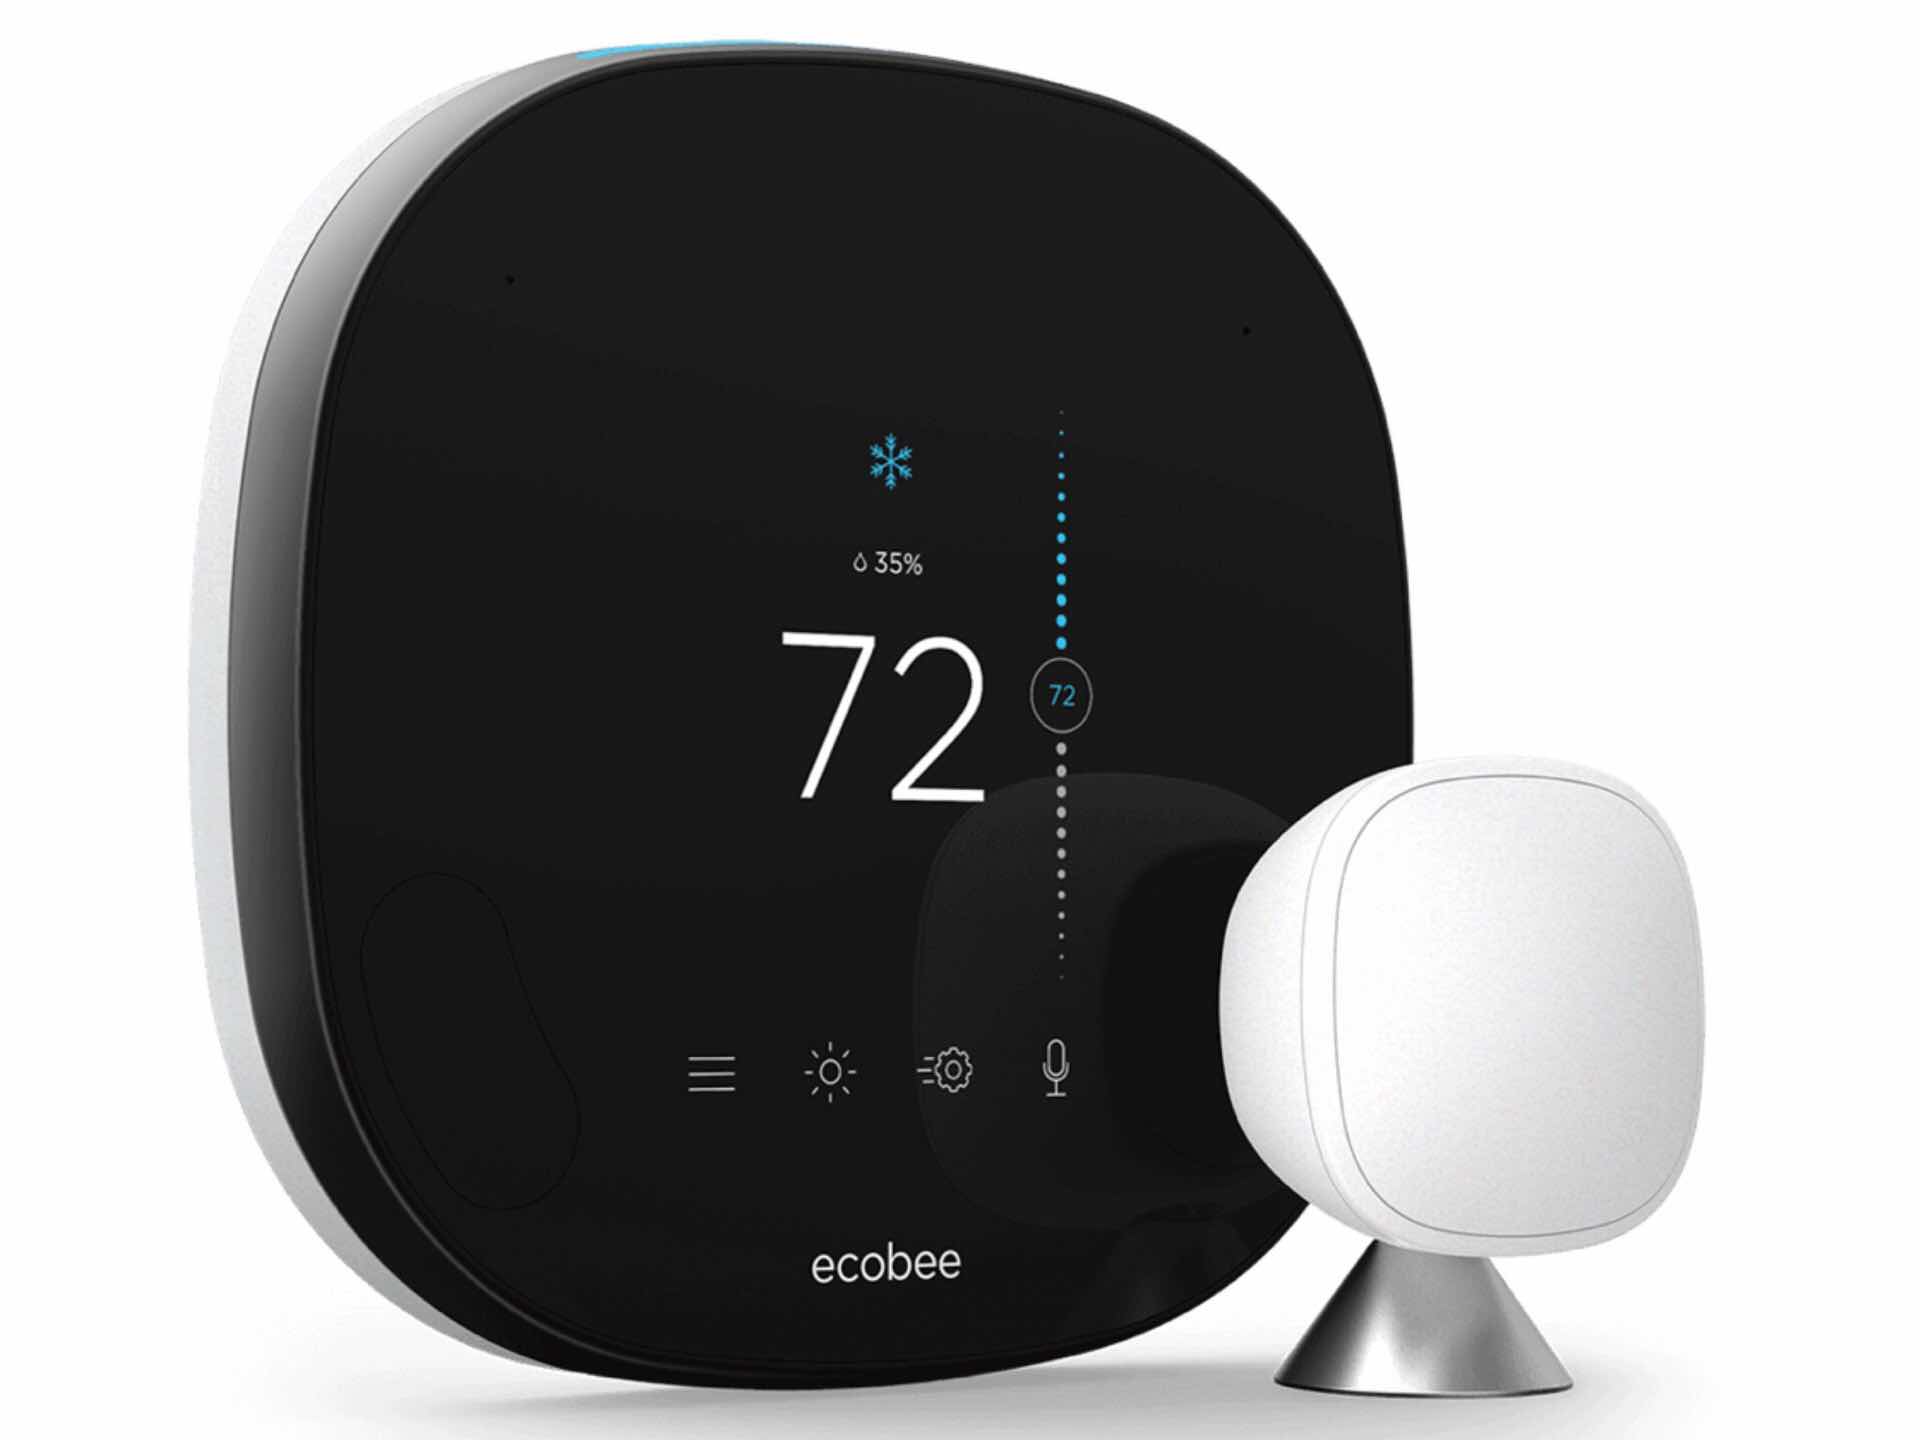 ecobee's SmartThermostat with Voice Control. ($220)